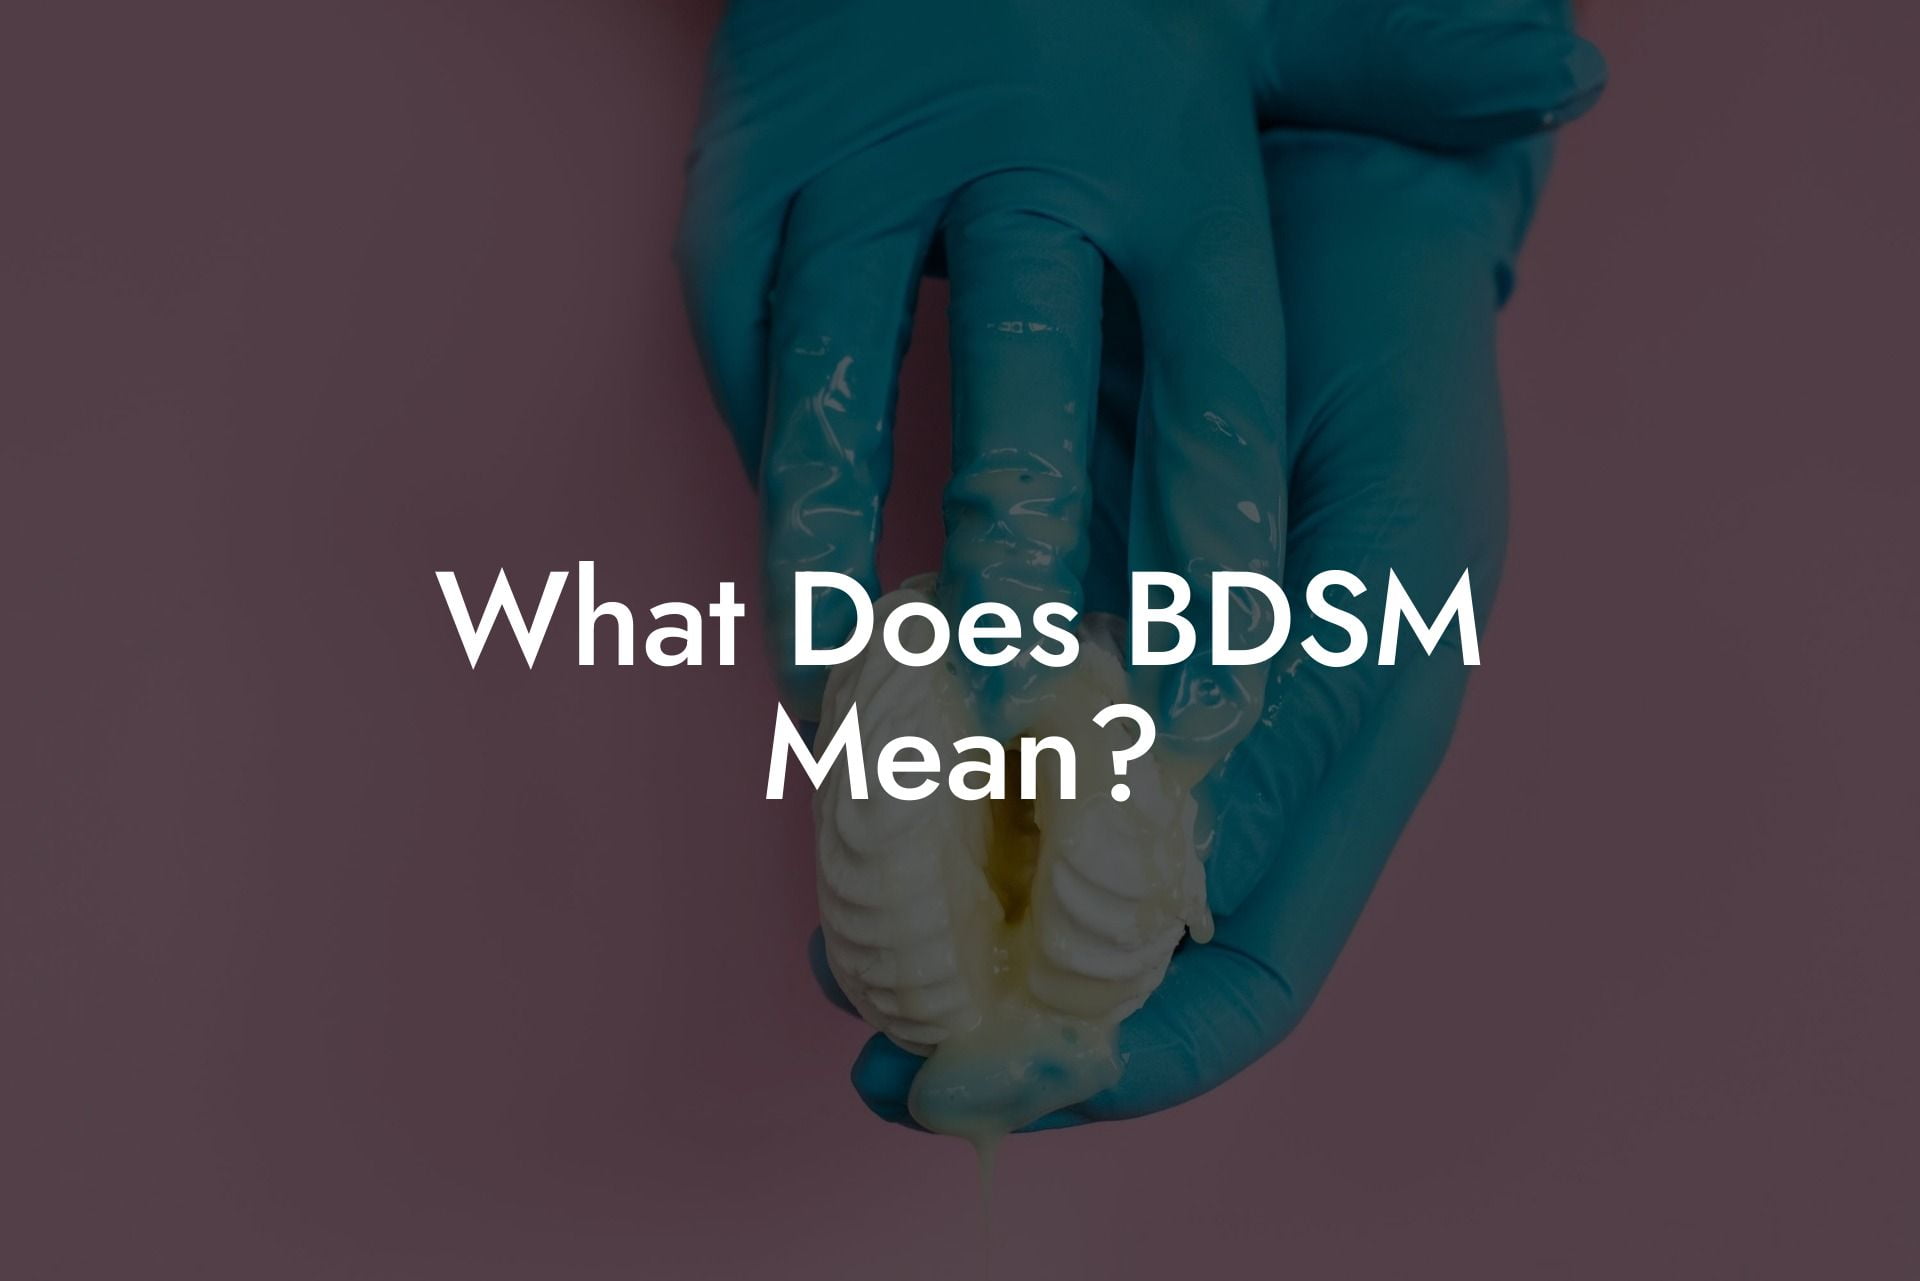 What Does BDSM Mean?